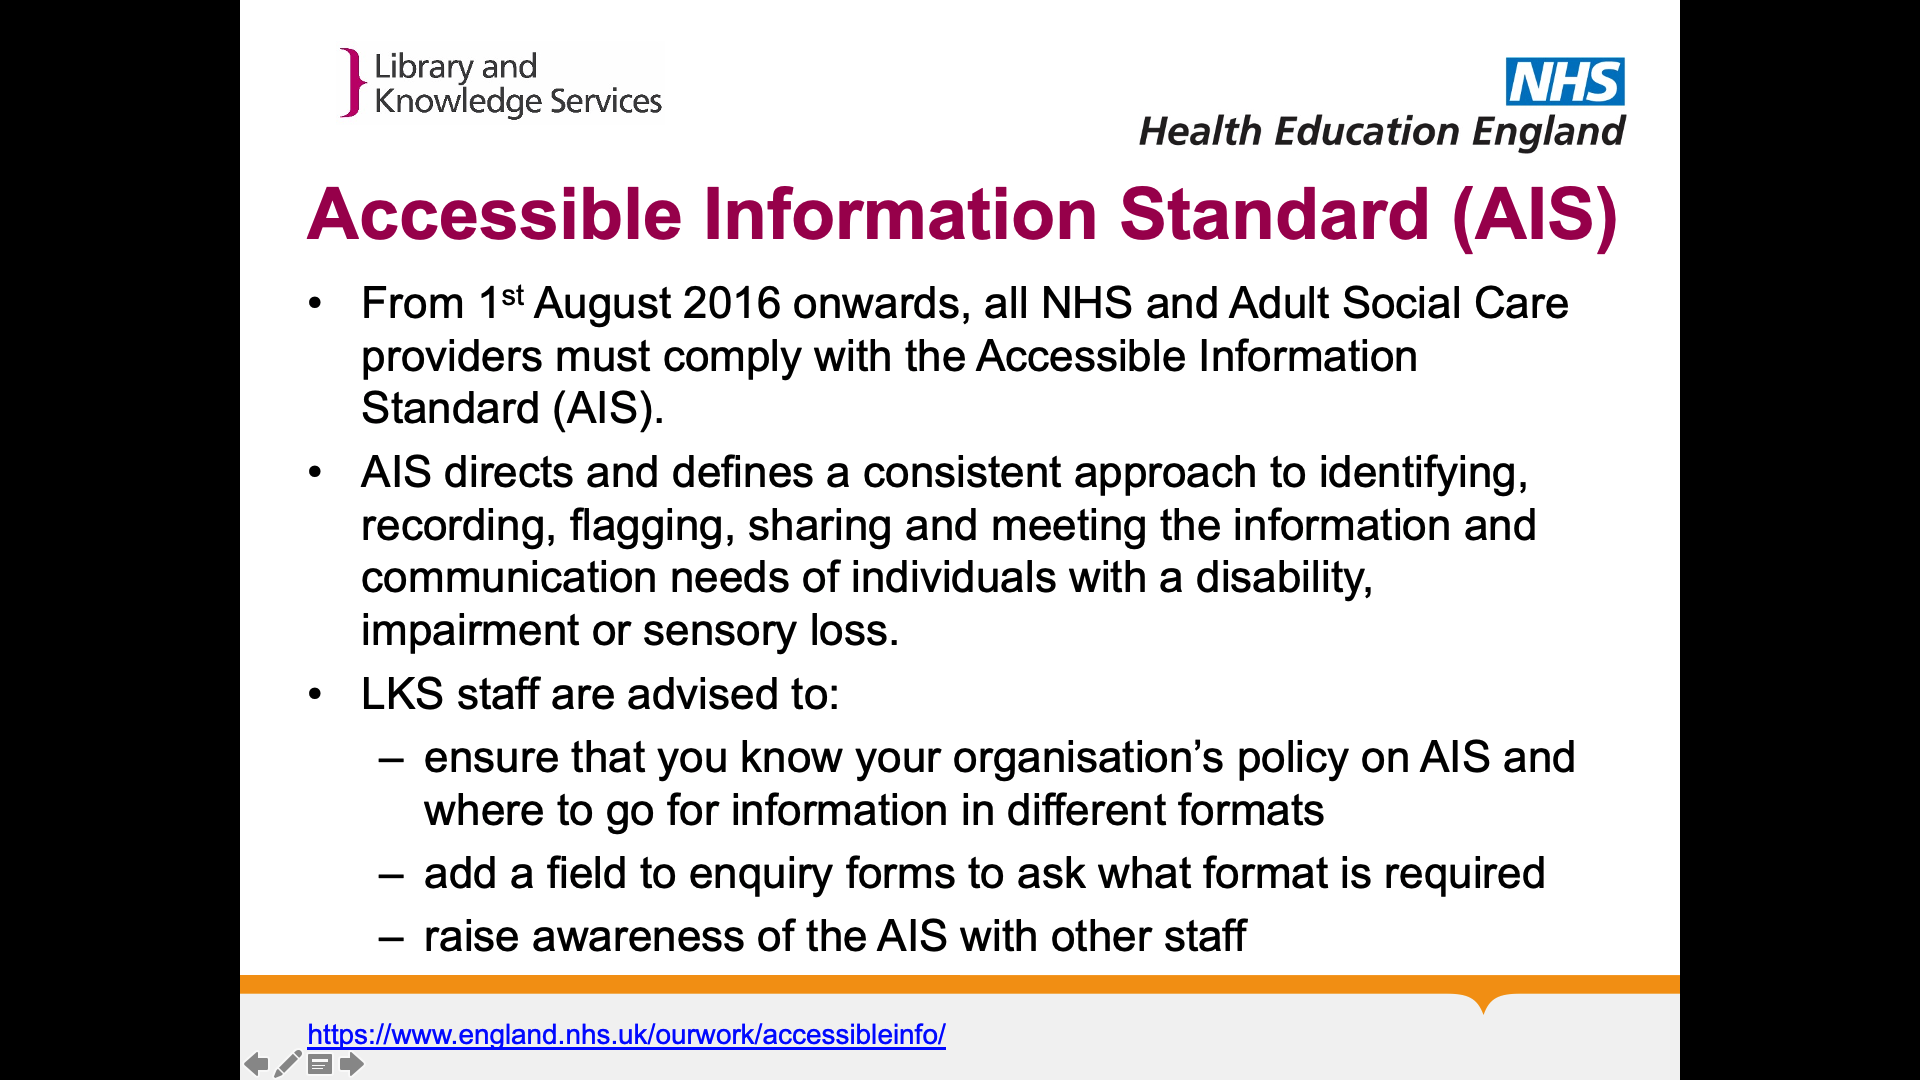 Title: Accessible Information Standard (AIS). Text on page: From 1st August 2016 onwards, all NHS and Adult Social Care providers must comply with the Accessible Information Standard (AIS). AIS directs and defines a consistent approach to identifying, recording, flagging, sharing and meeting the information and communication needs of individuals with a disability, impairment or sensory loss. LKS staff are advised to:  ensure that you know your organisation’s policy on AIS and where to go for information in different formats  add a field to enquiry forms to ask what format is required  raise awareness of the AIS with other staff